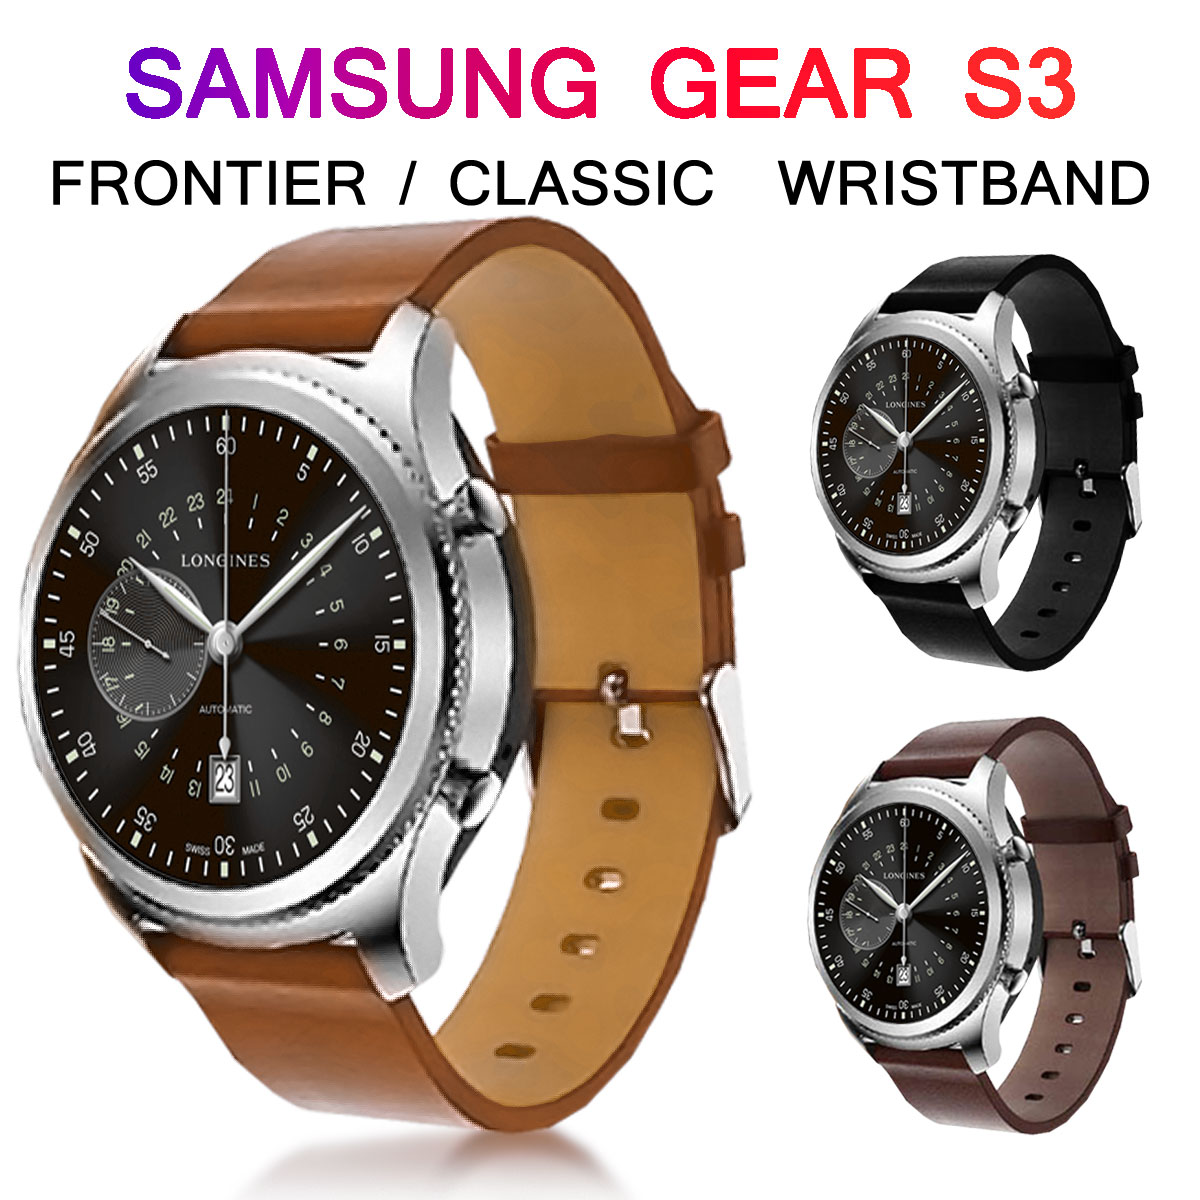 22mm-Leather-Watch-Band-Strap-for-Samsung-Gear-S3-FrontierClassic-1288488